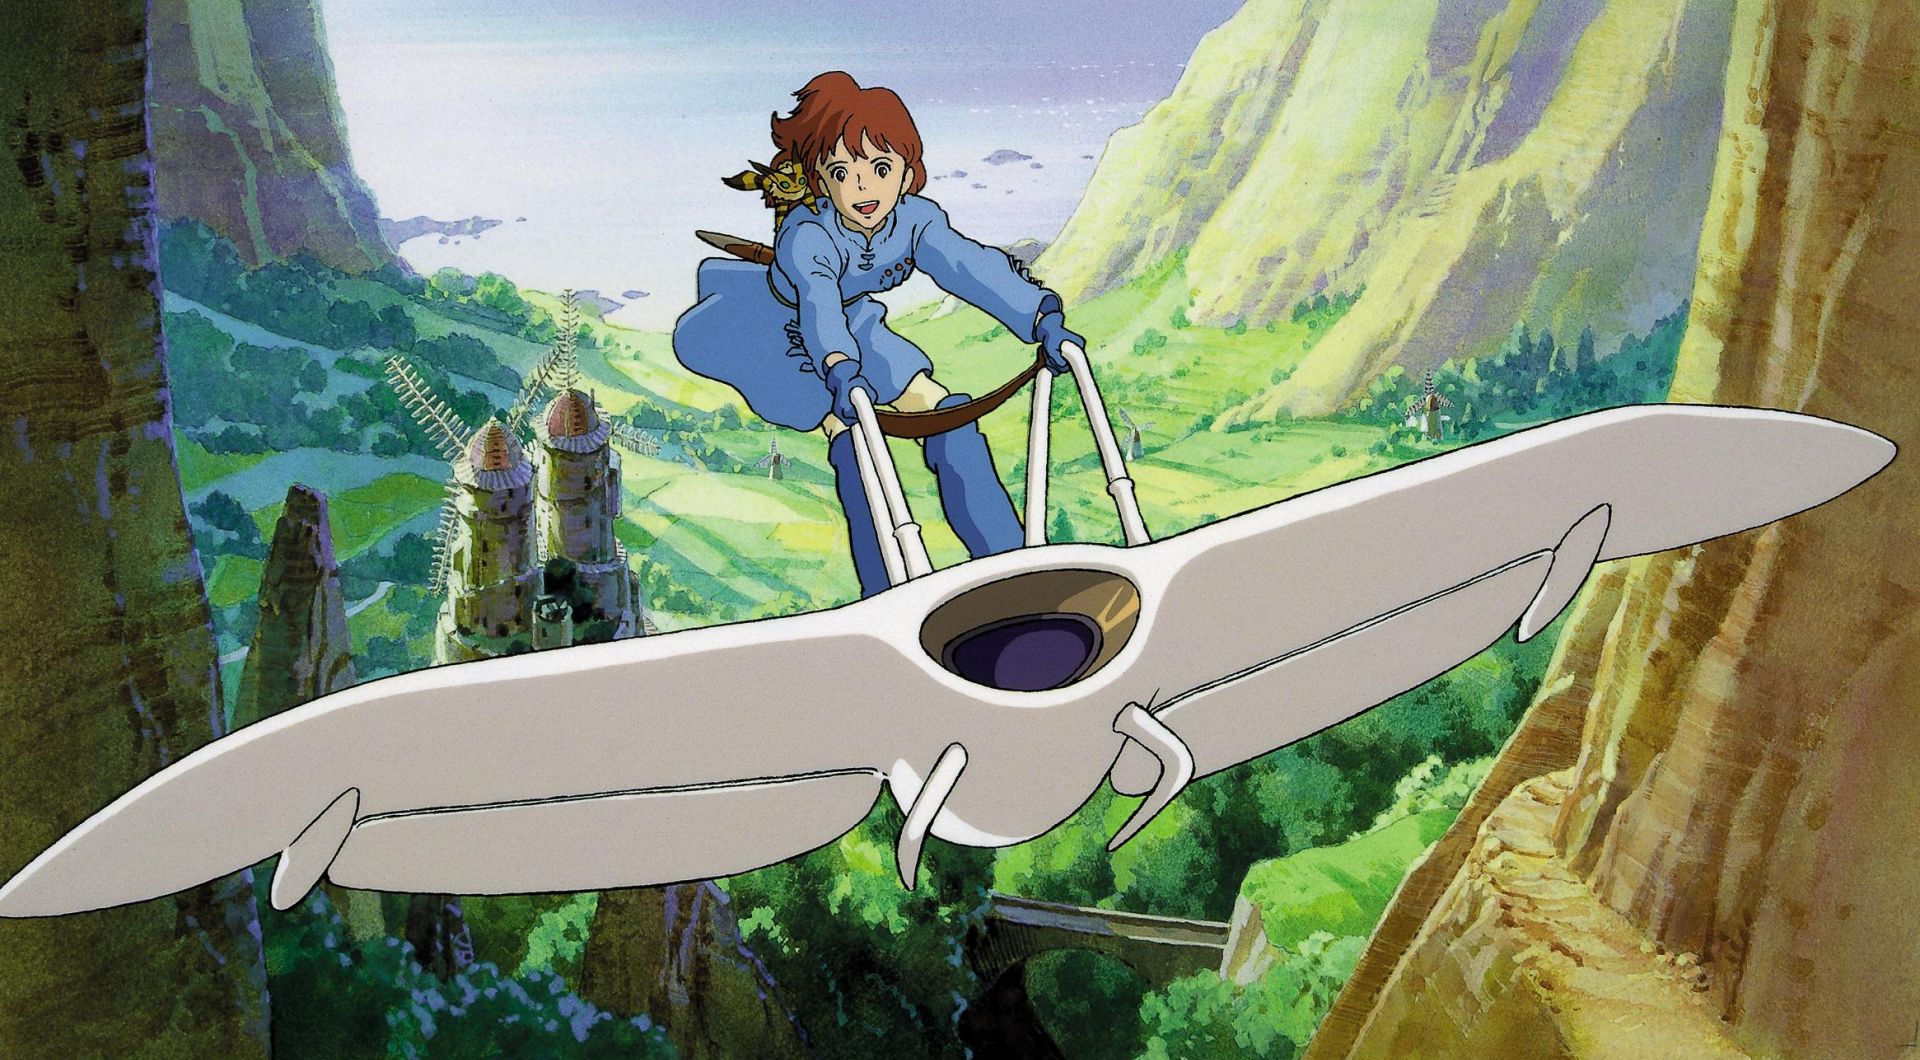 Nausicaa along with Teto, her pet fox-squirrel, fly above the Valley of the Wind on her glider. 